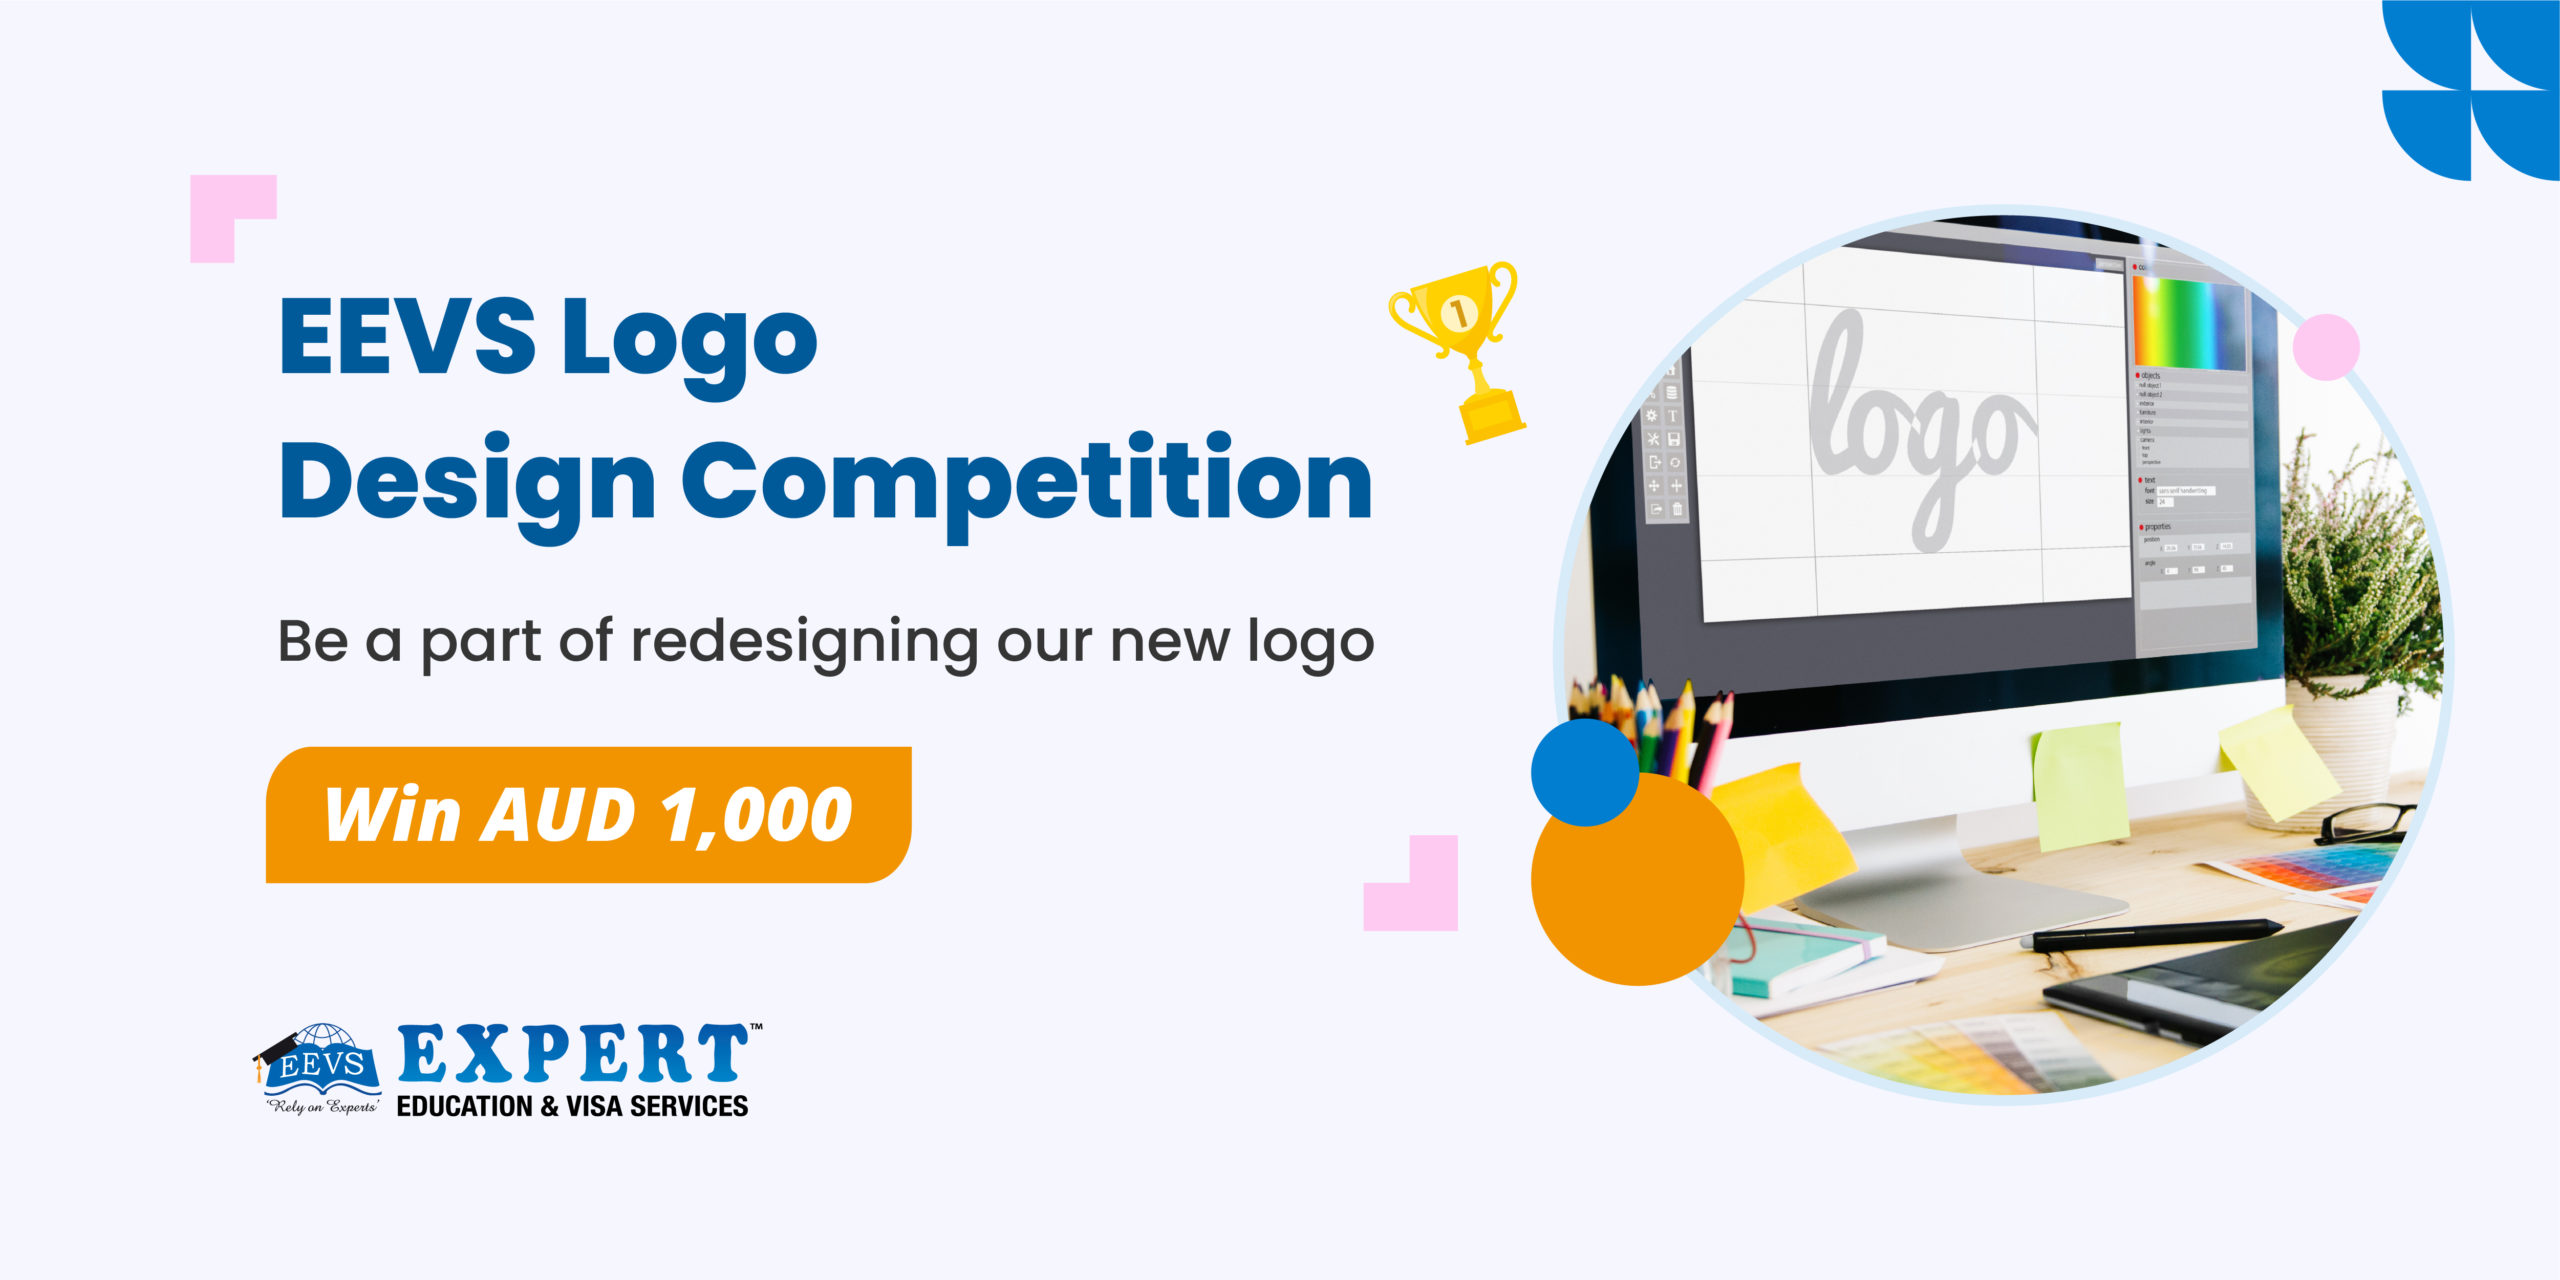 EEVS Logo Redesign Competition